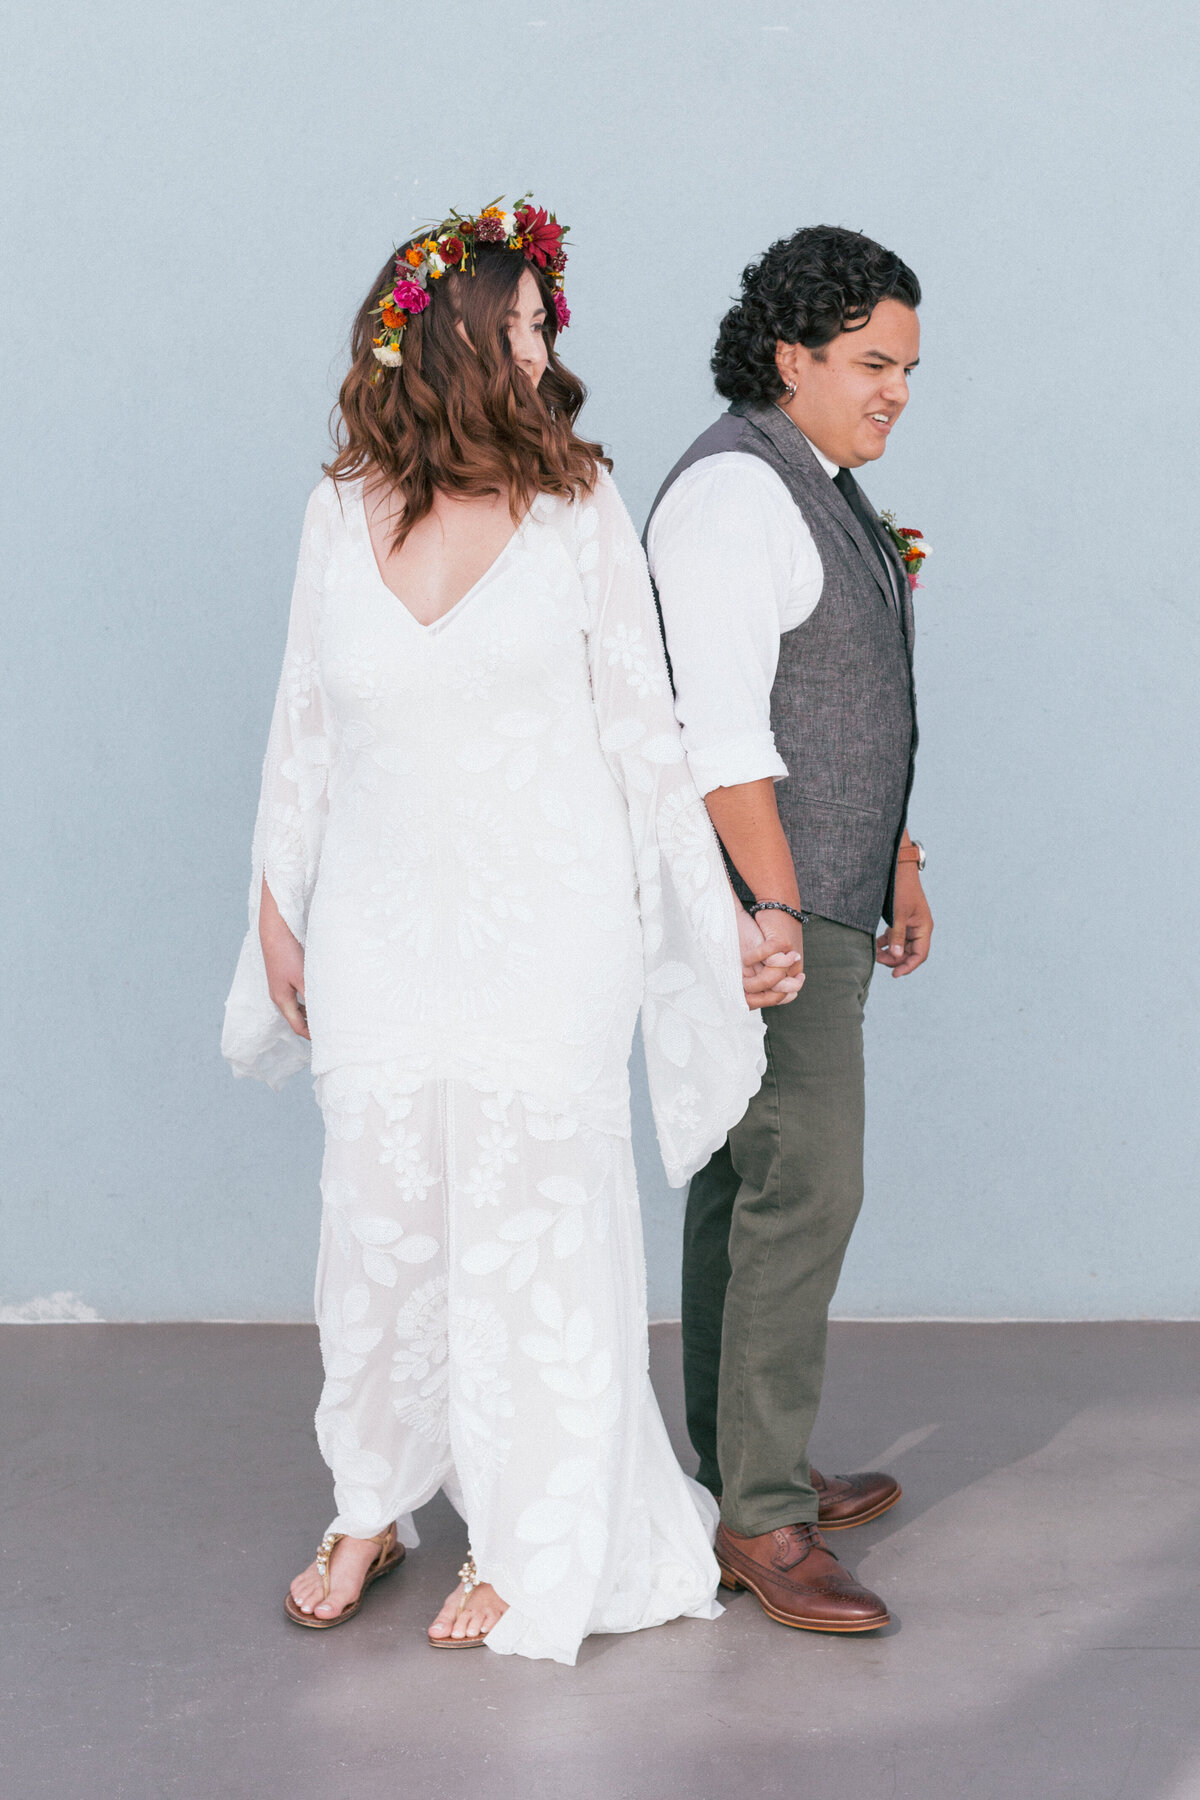 First Look Outdoor Bay Area Wedding Couple